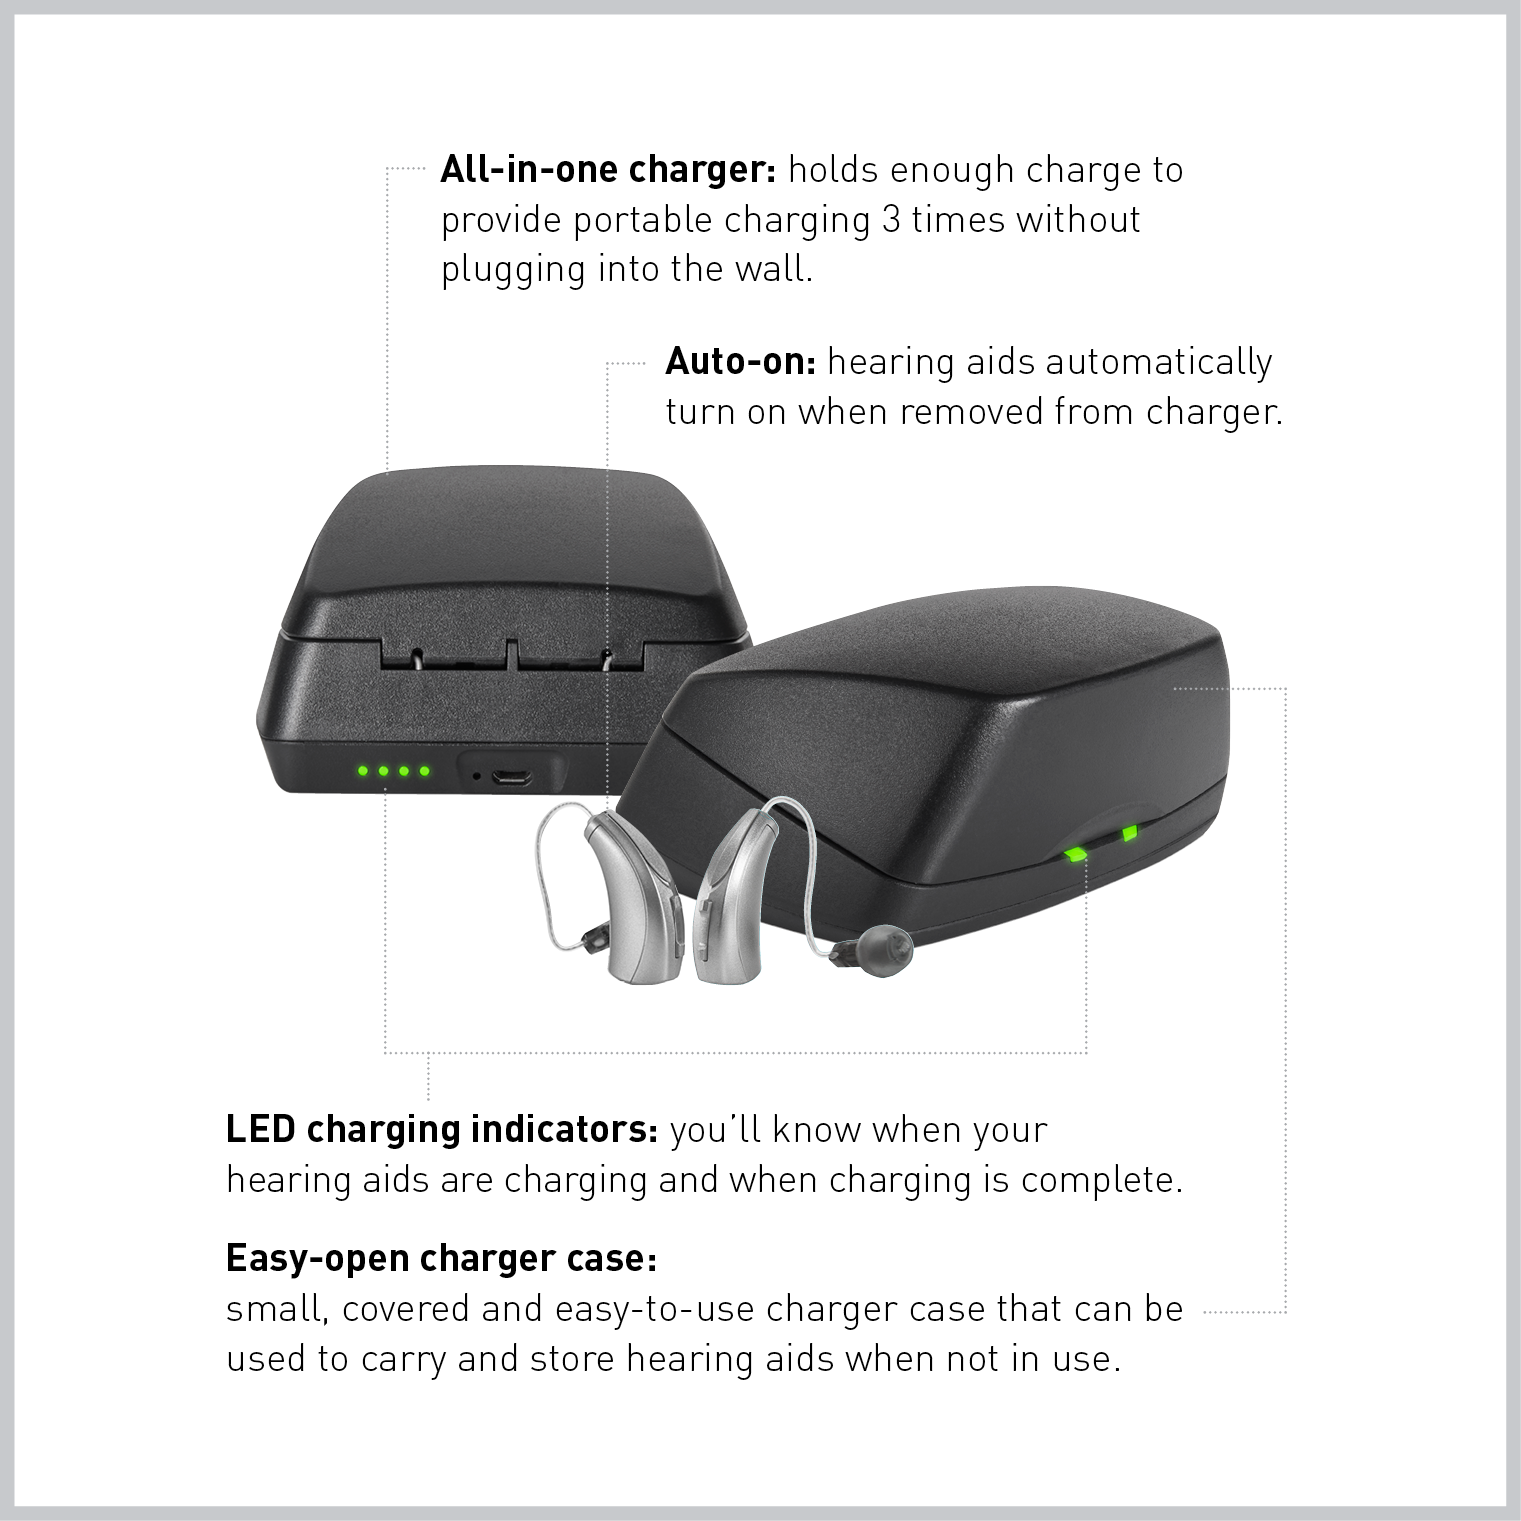 Technology features of the new smart, smallest rechargeable hearing aid from Starkey Hearing Technologies. 